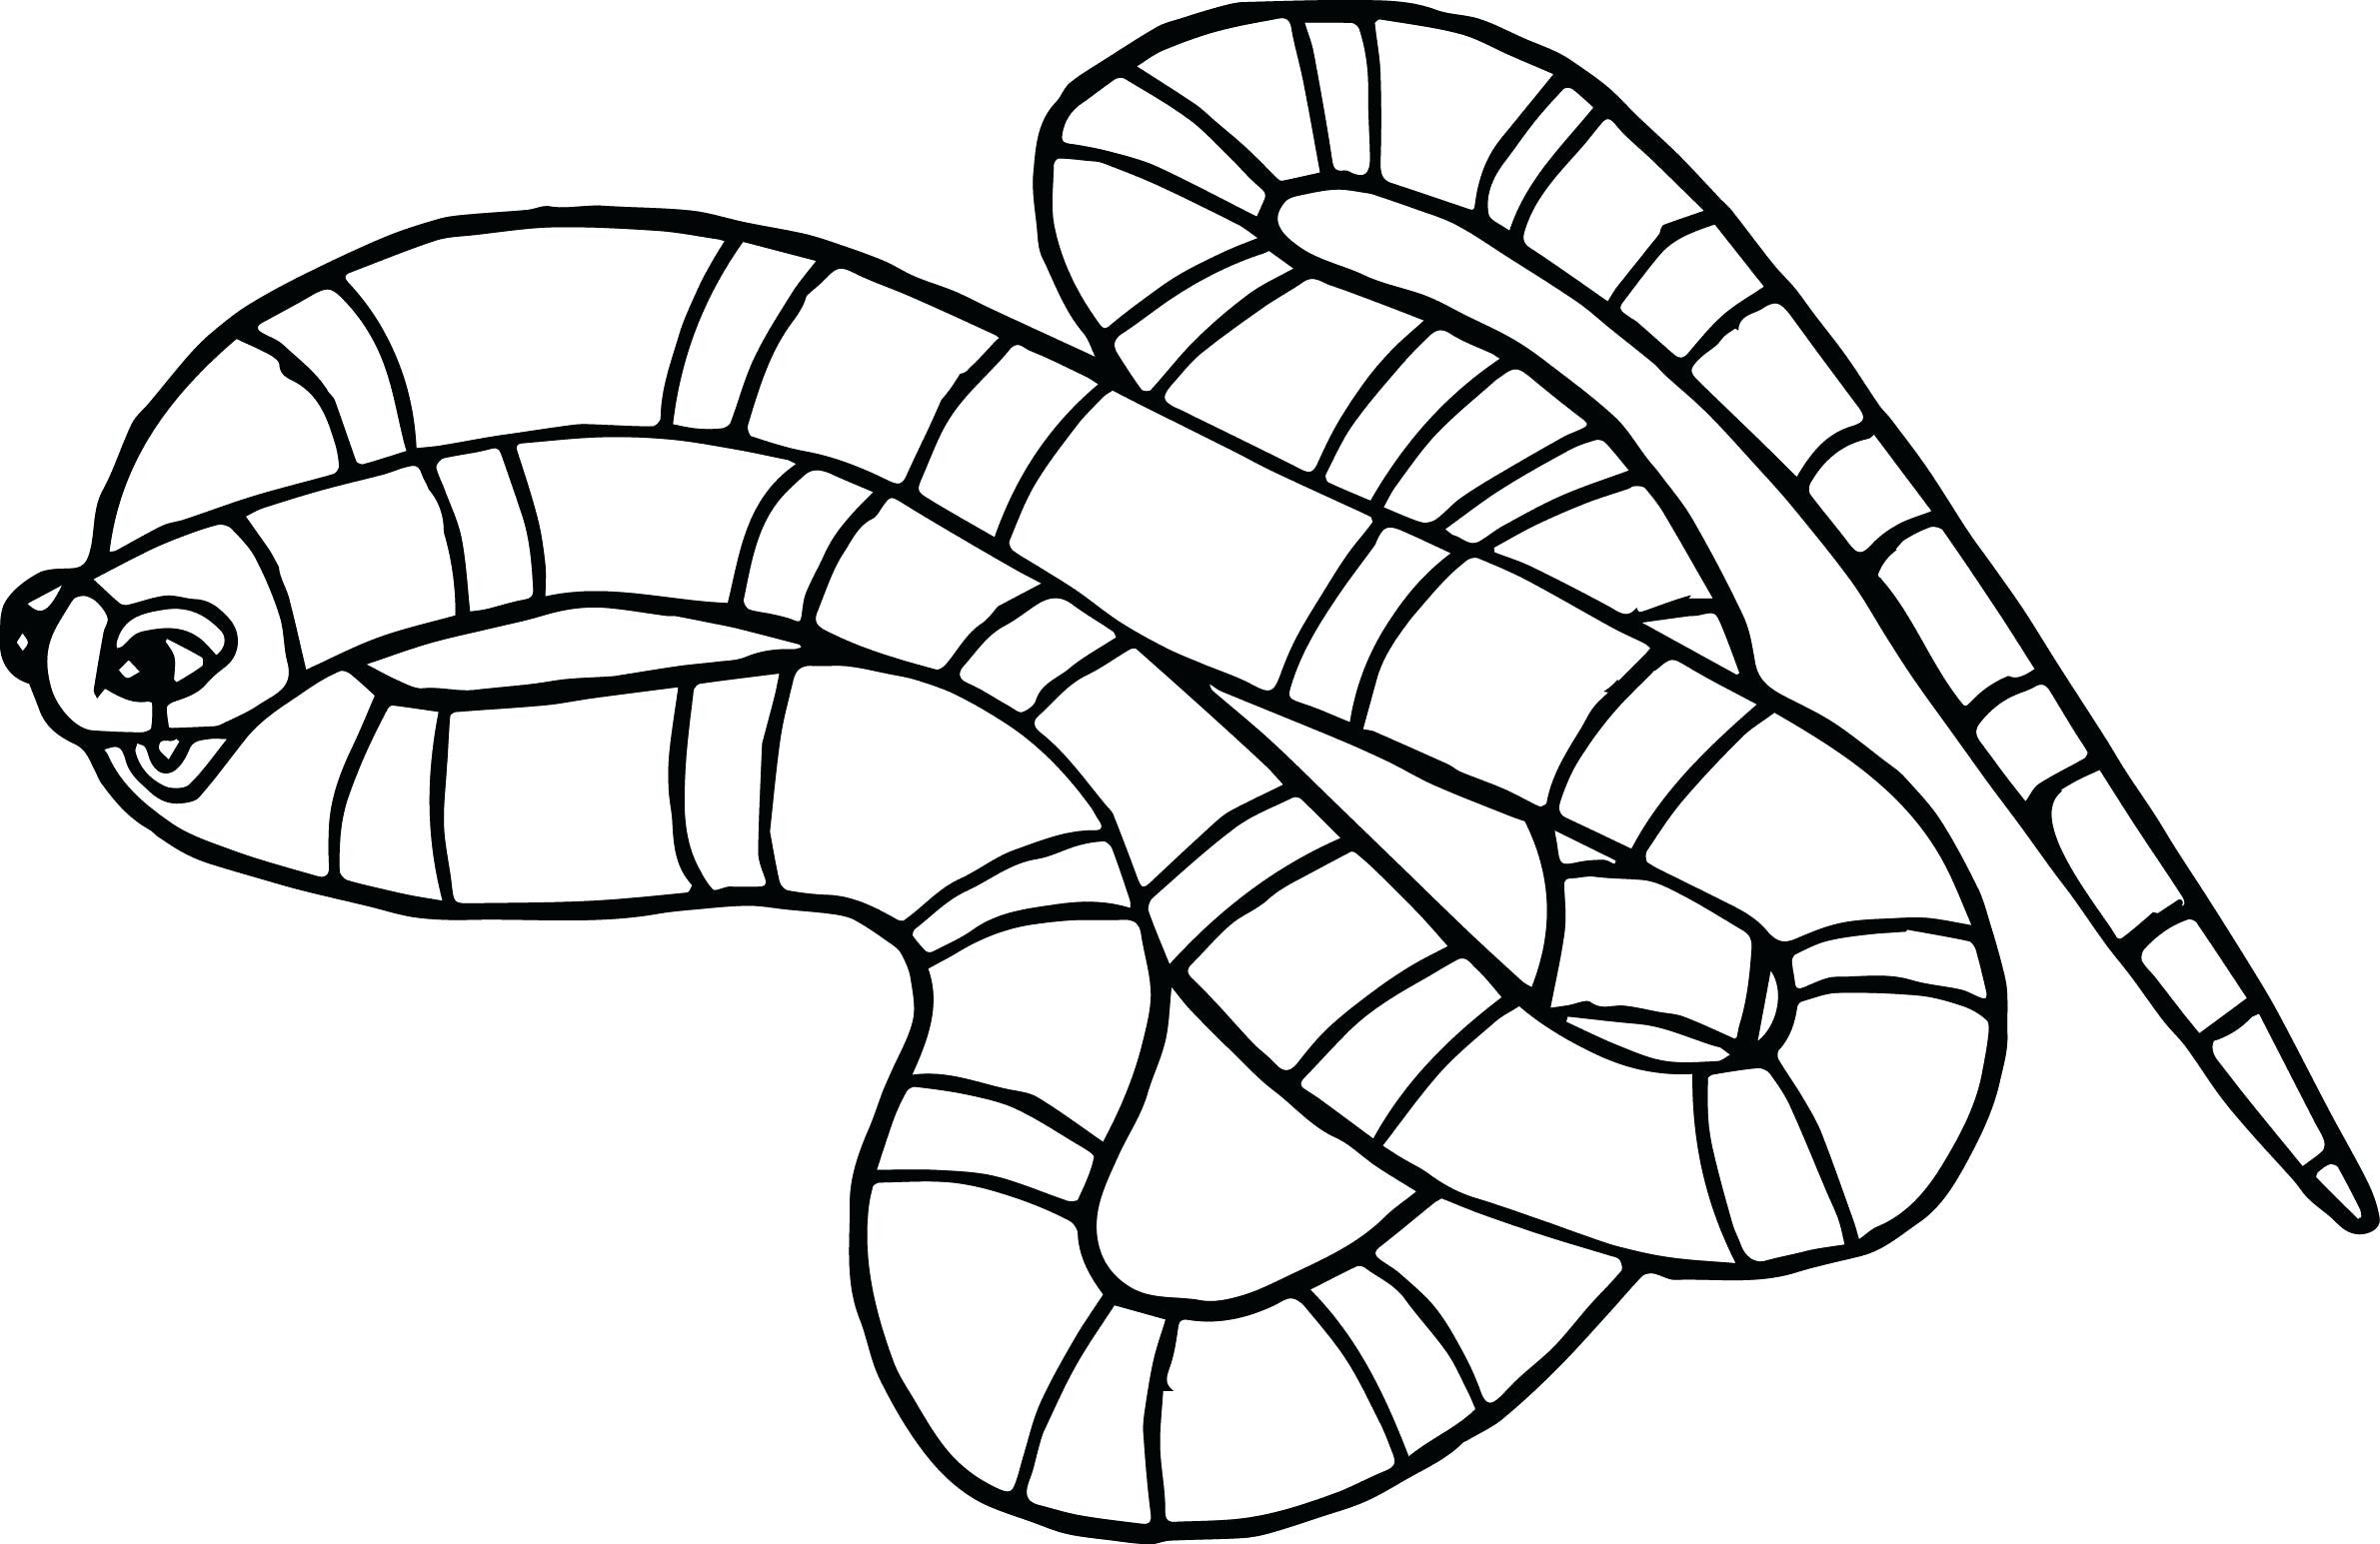 snake-coloring-pages-for-kids-at-getcolorings-free-printable-colorings-pages-to-print-and